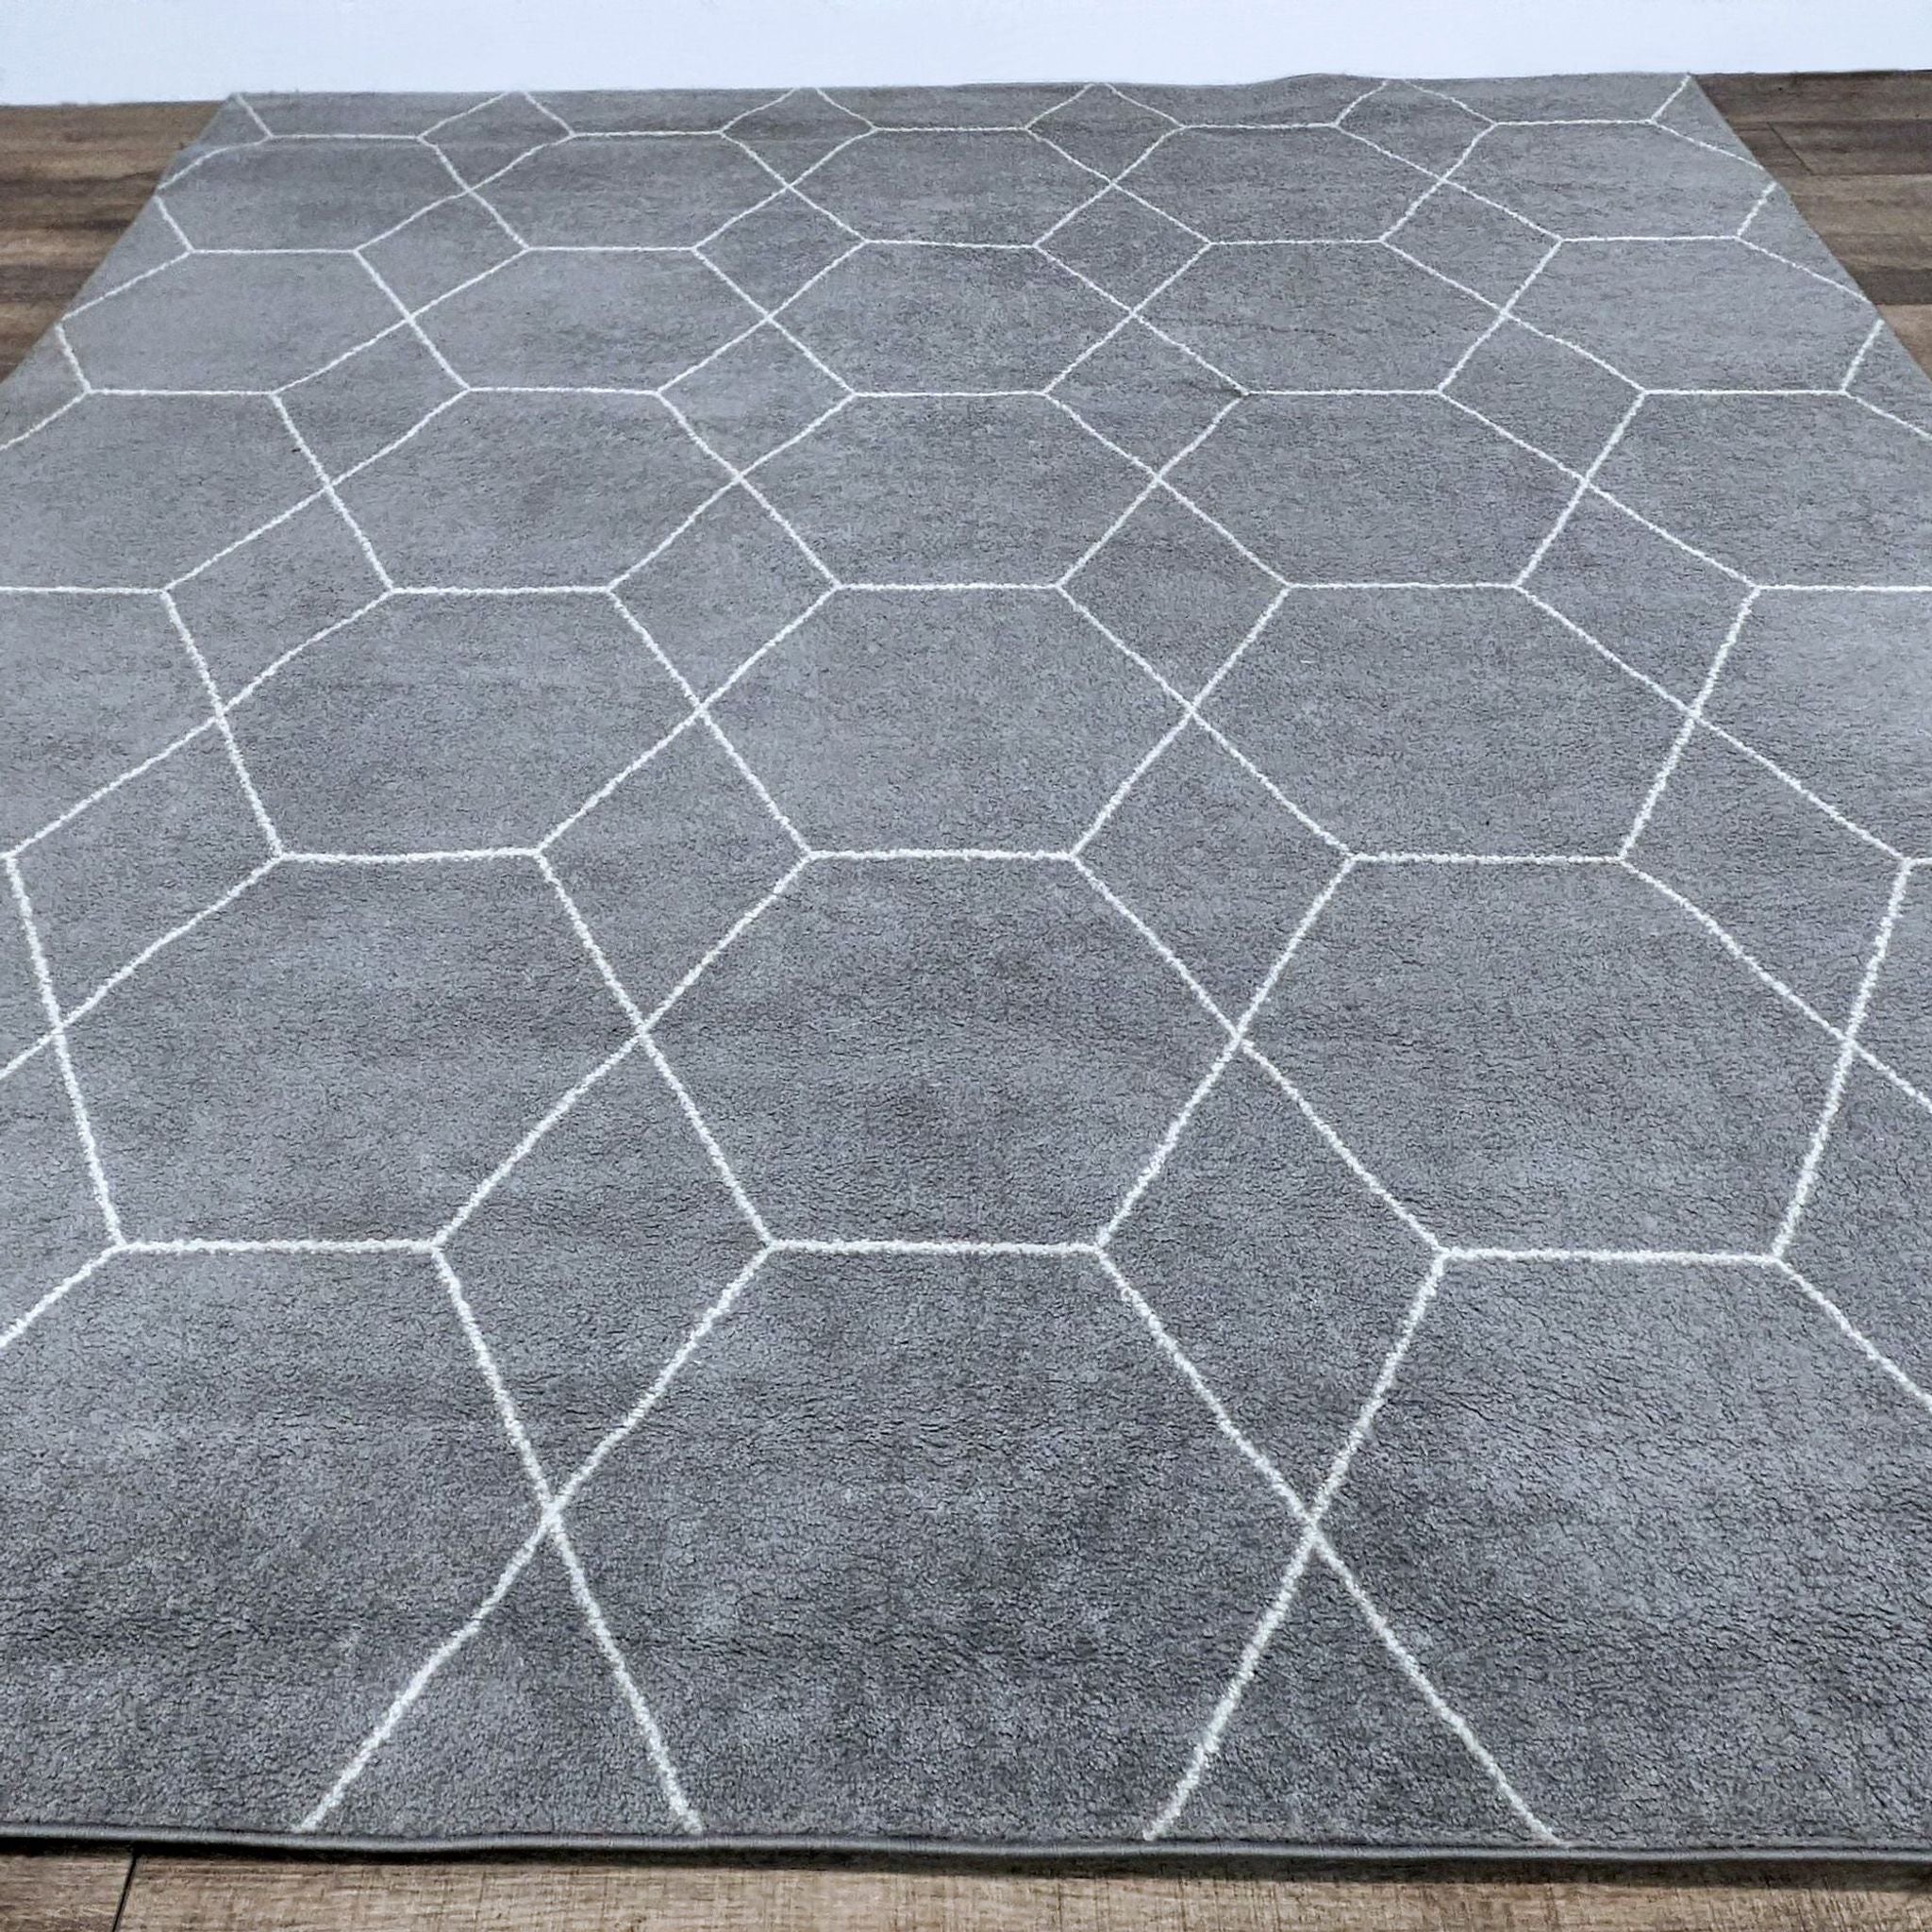 Unique Loom's Trellis Frieze 8x10 area rug with geometric pattern, power loomed in Turkey from polypropylene.